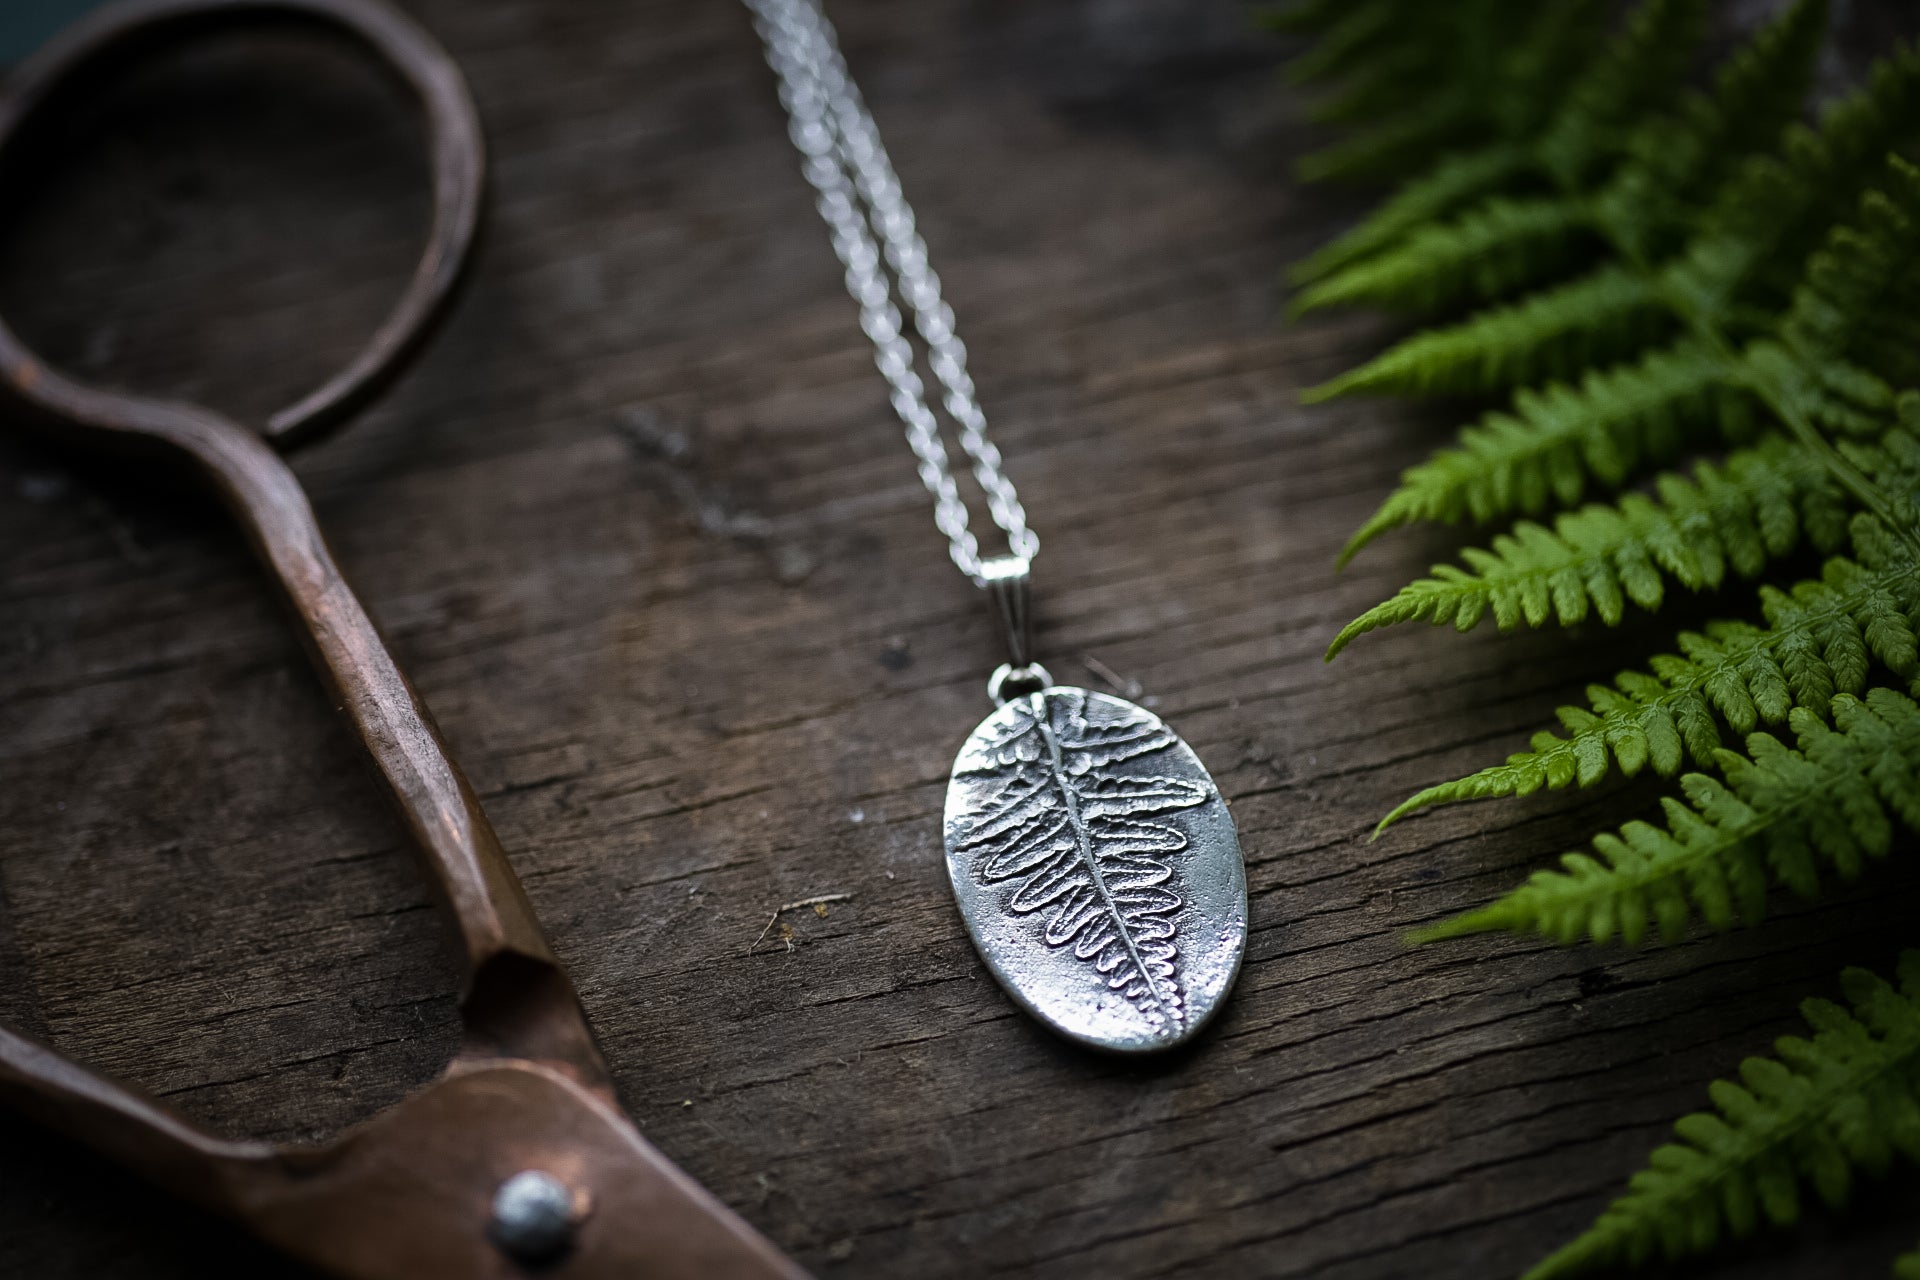 Fern leaf pendant ~ For Magic, Protection & Healing